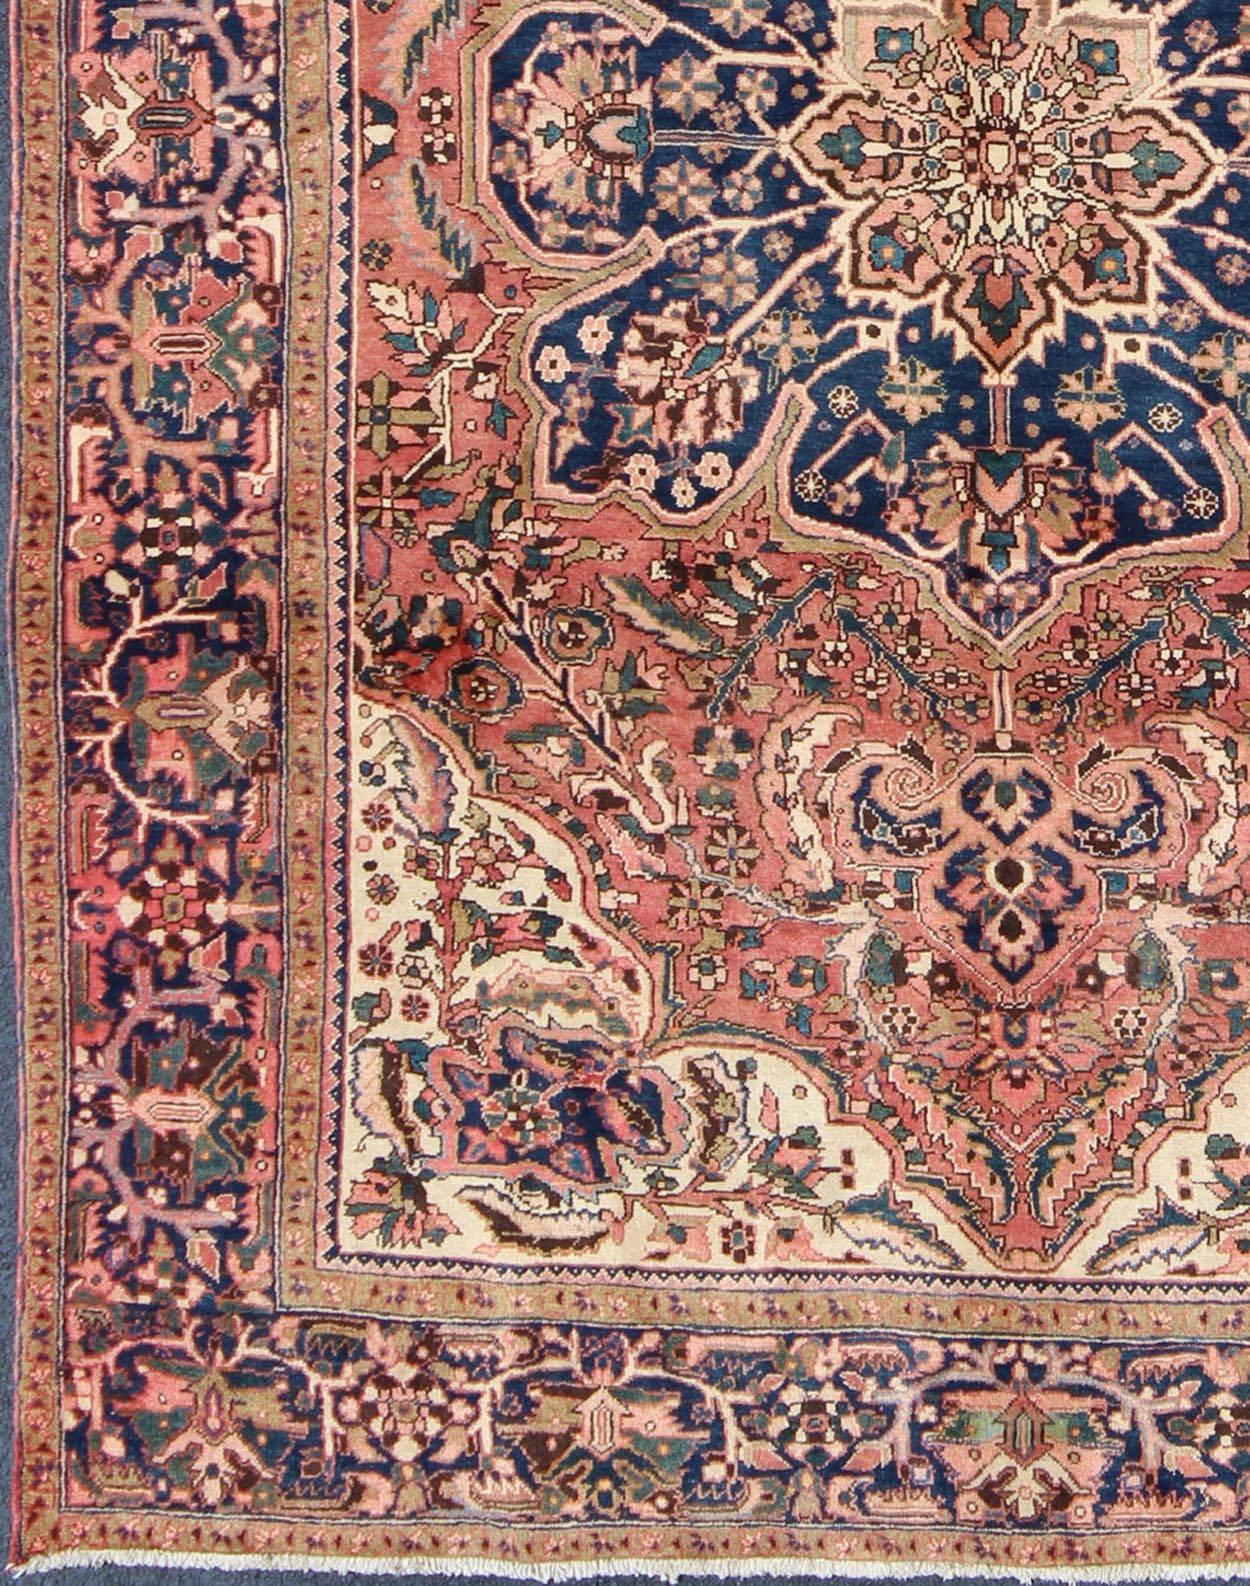 Semi Antique Heriz Persian Rug with Geometric Medallion in Rust and Blue, H-501-26, 1950’s Semi Antique Persian Heriz Rug-8'9 X 11'8
This magnificent antique Persian Heriz carpet from the mid-20th century bears an exquisite design rendered in